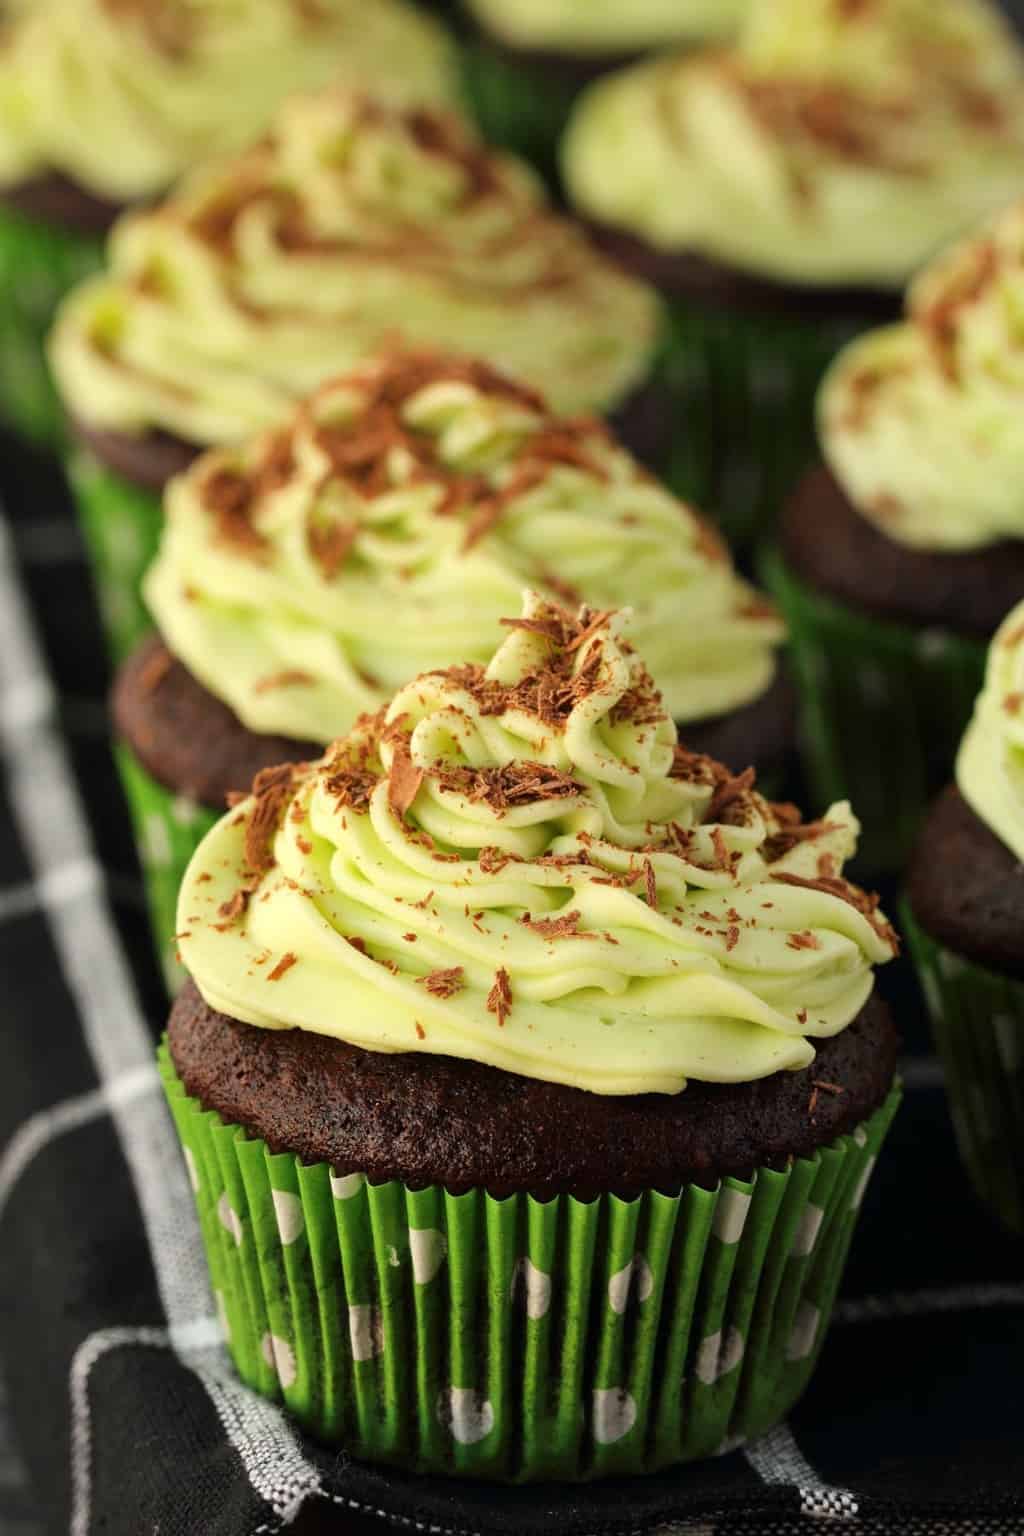 Vegan chocolate cupcakes topped with mint buttercream frosting.